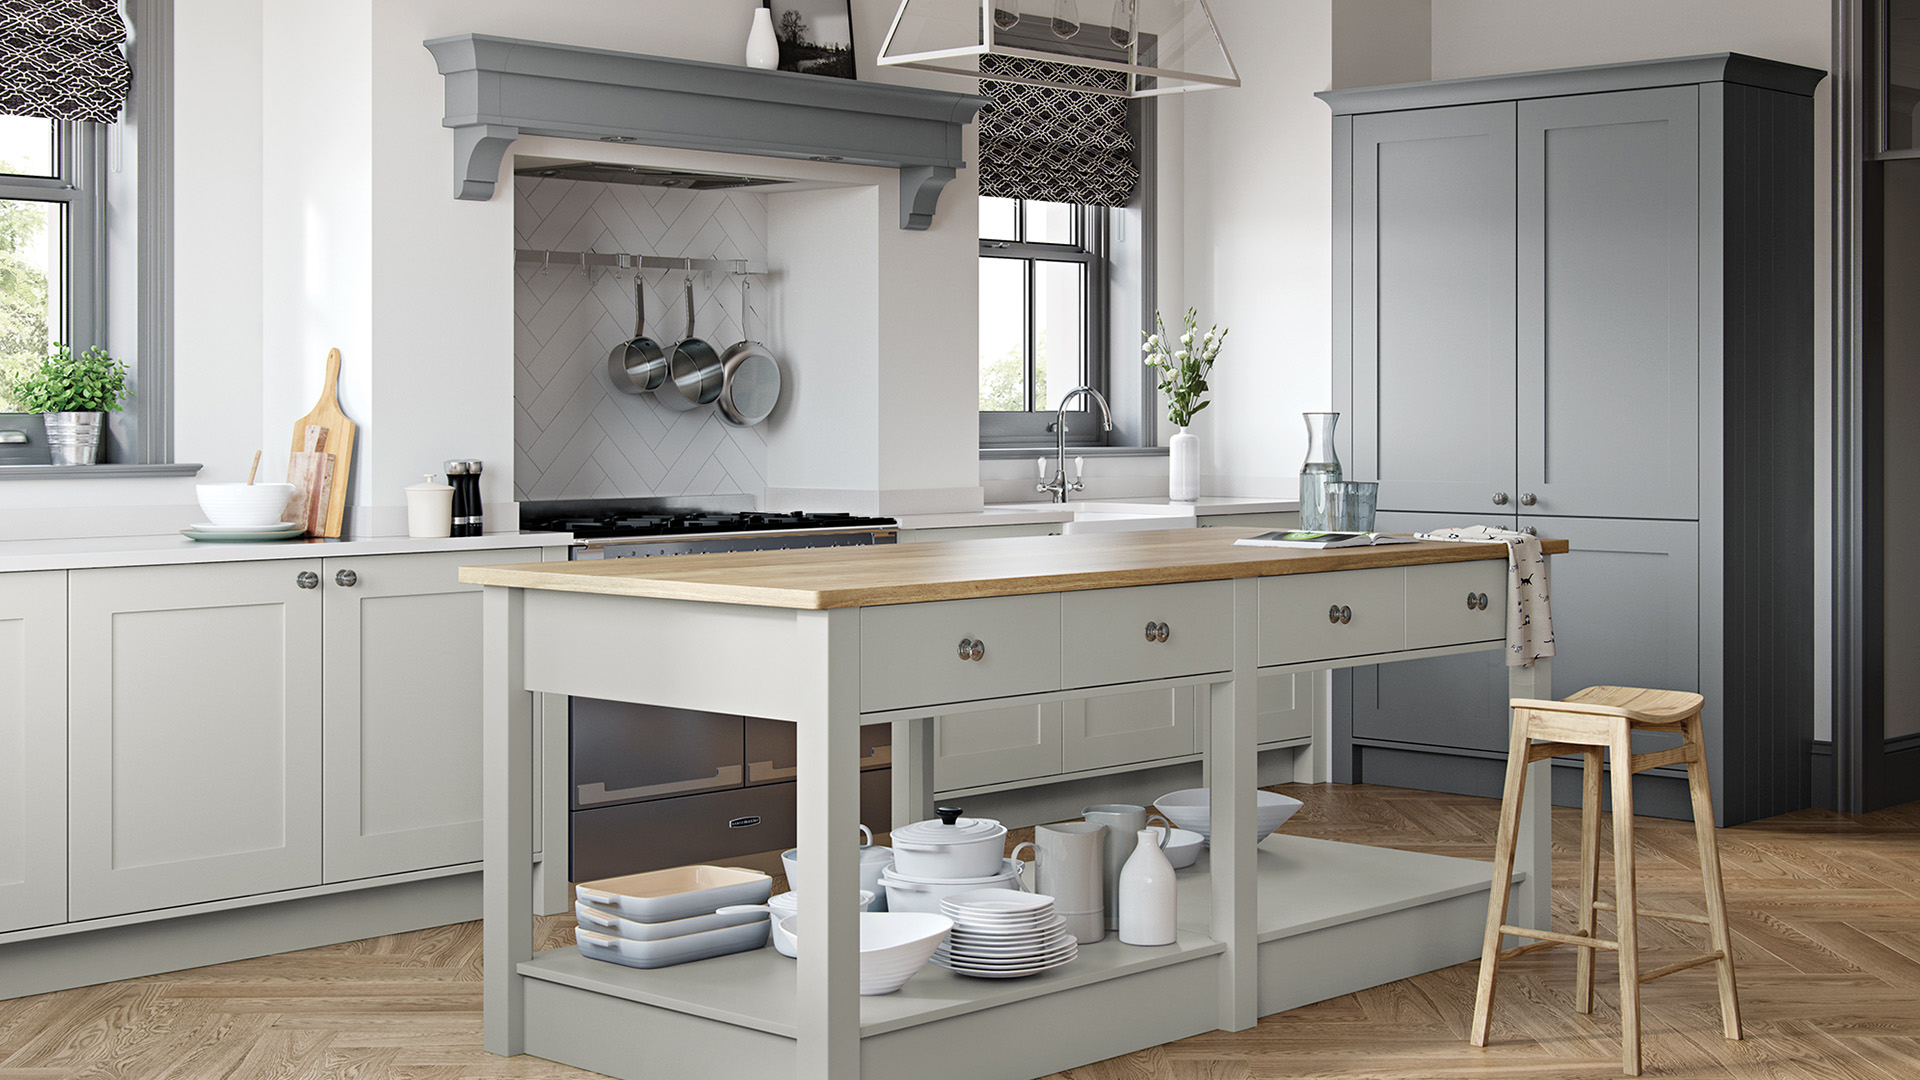 Georgia dust grey smooth shaker kitchens offering a combination of traditional design and mid-grey modernity